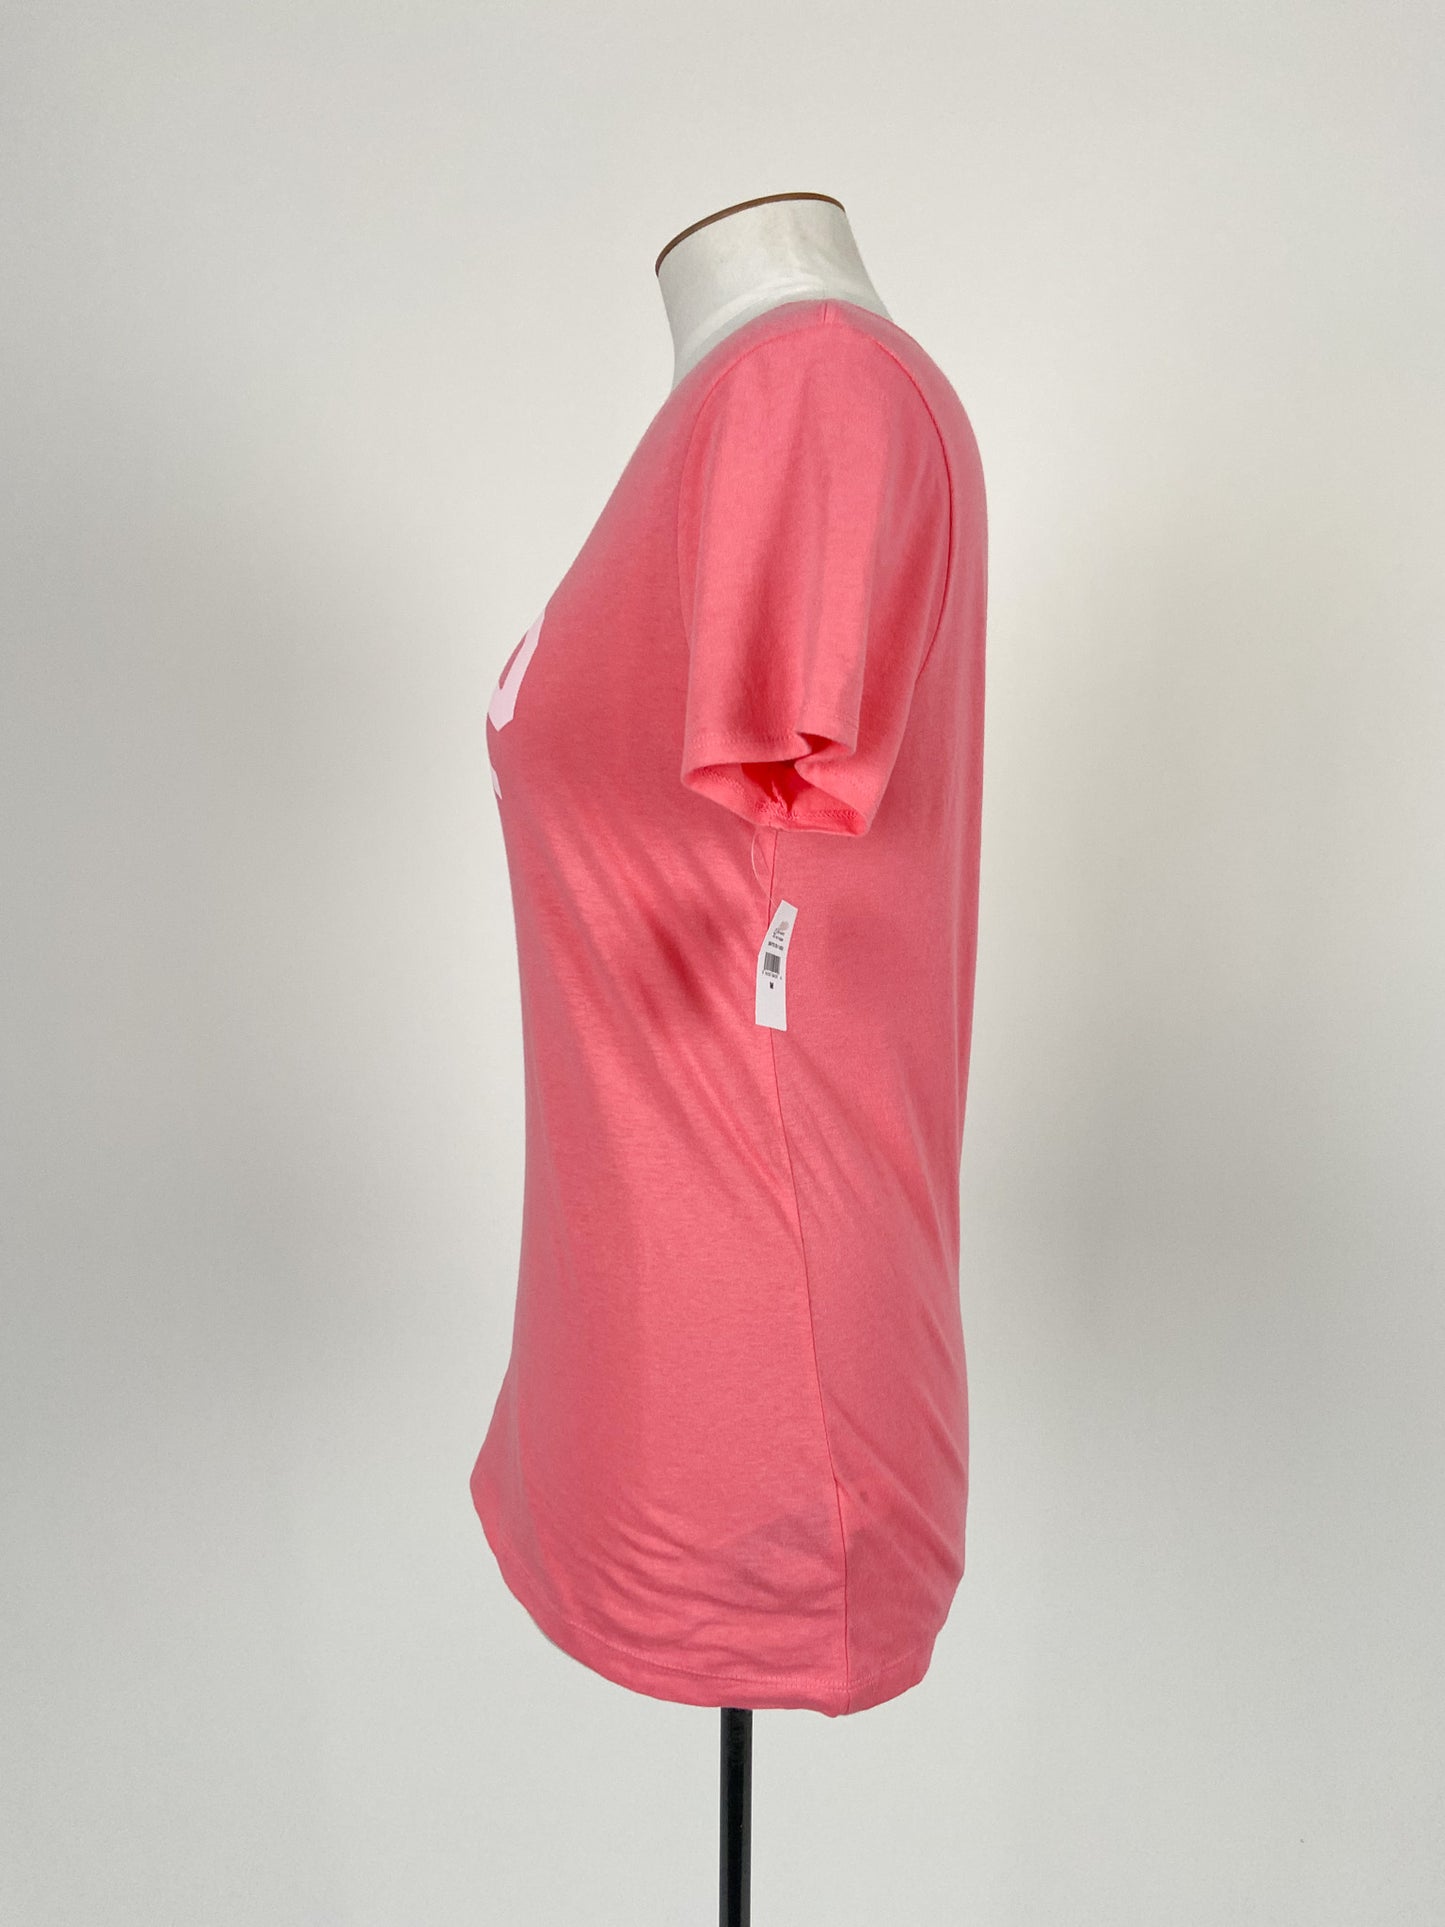 GAP | Pink Casual Top | Size M